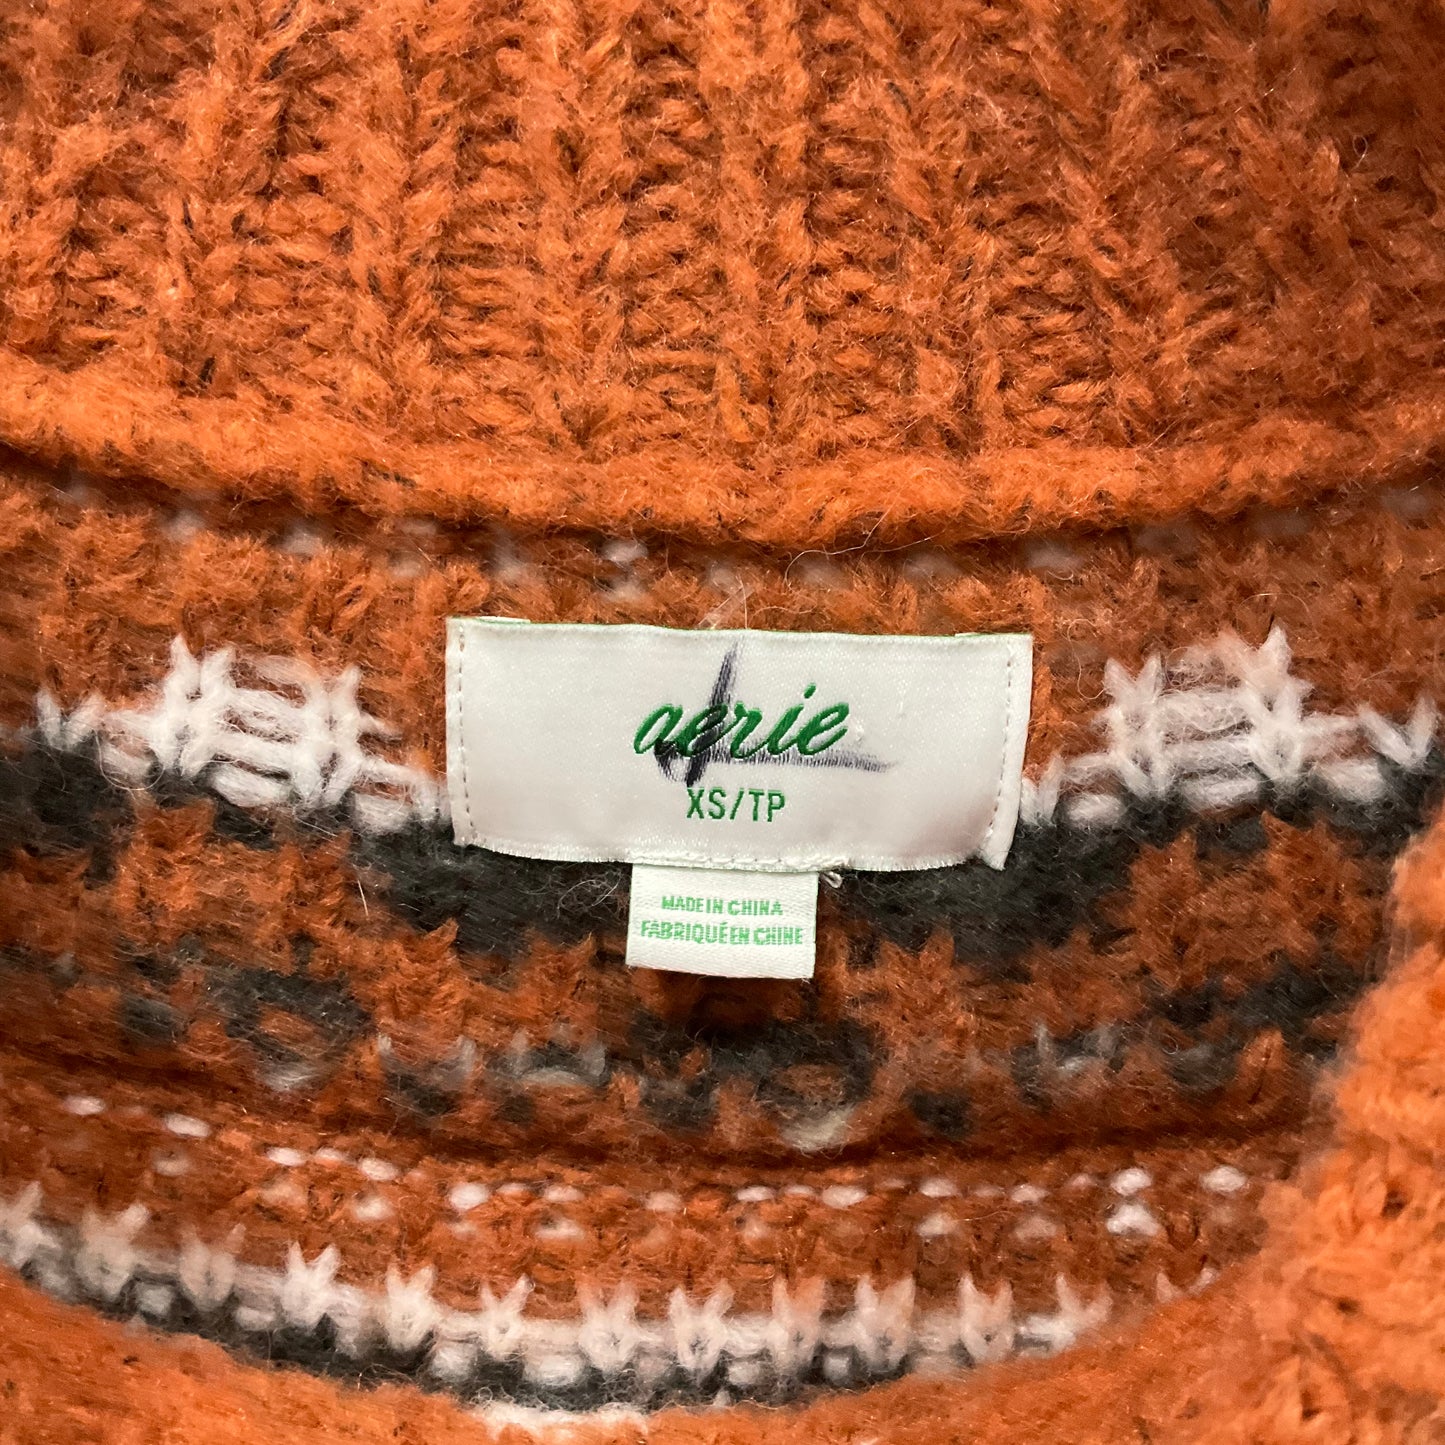 Sweater By Aerie  Size: Xs